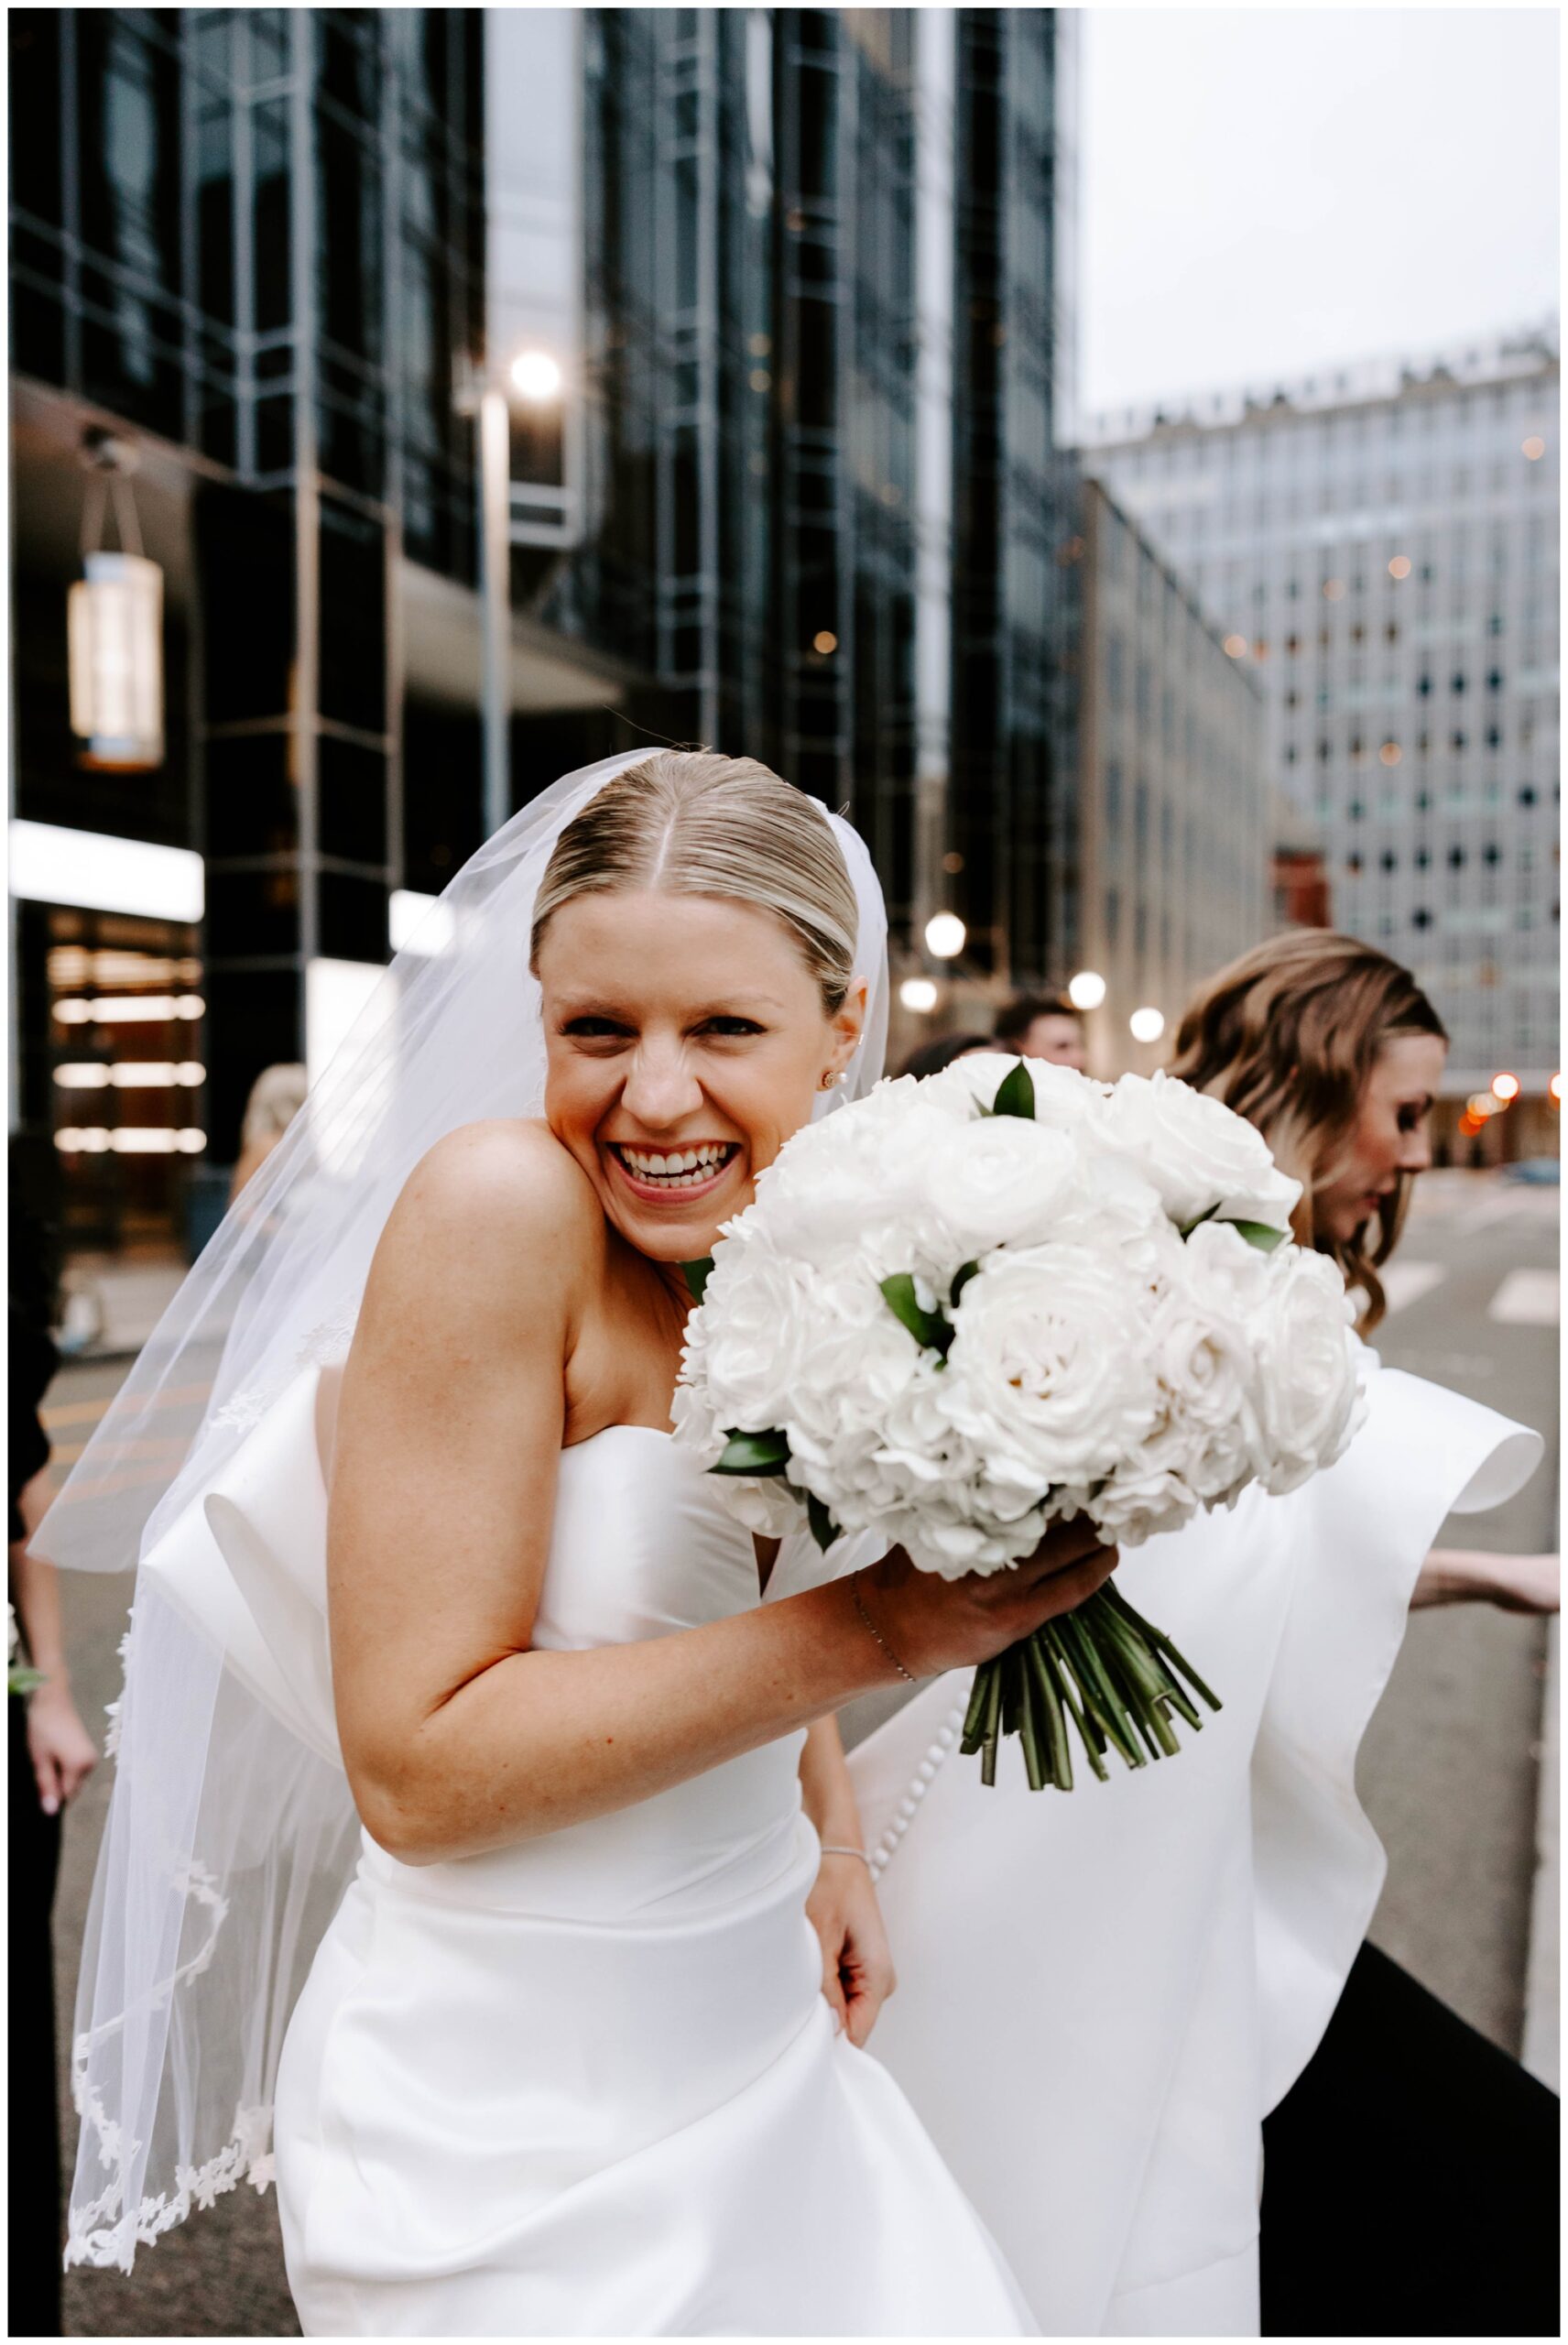 Rachel Wehan wedding photography at Wintergarden at PPG Place Pittsburgh